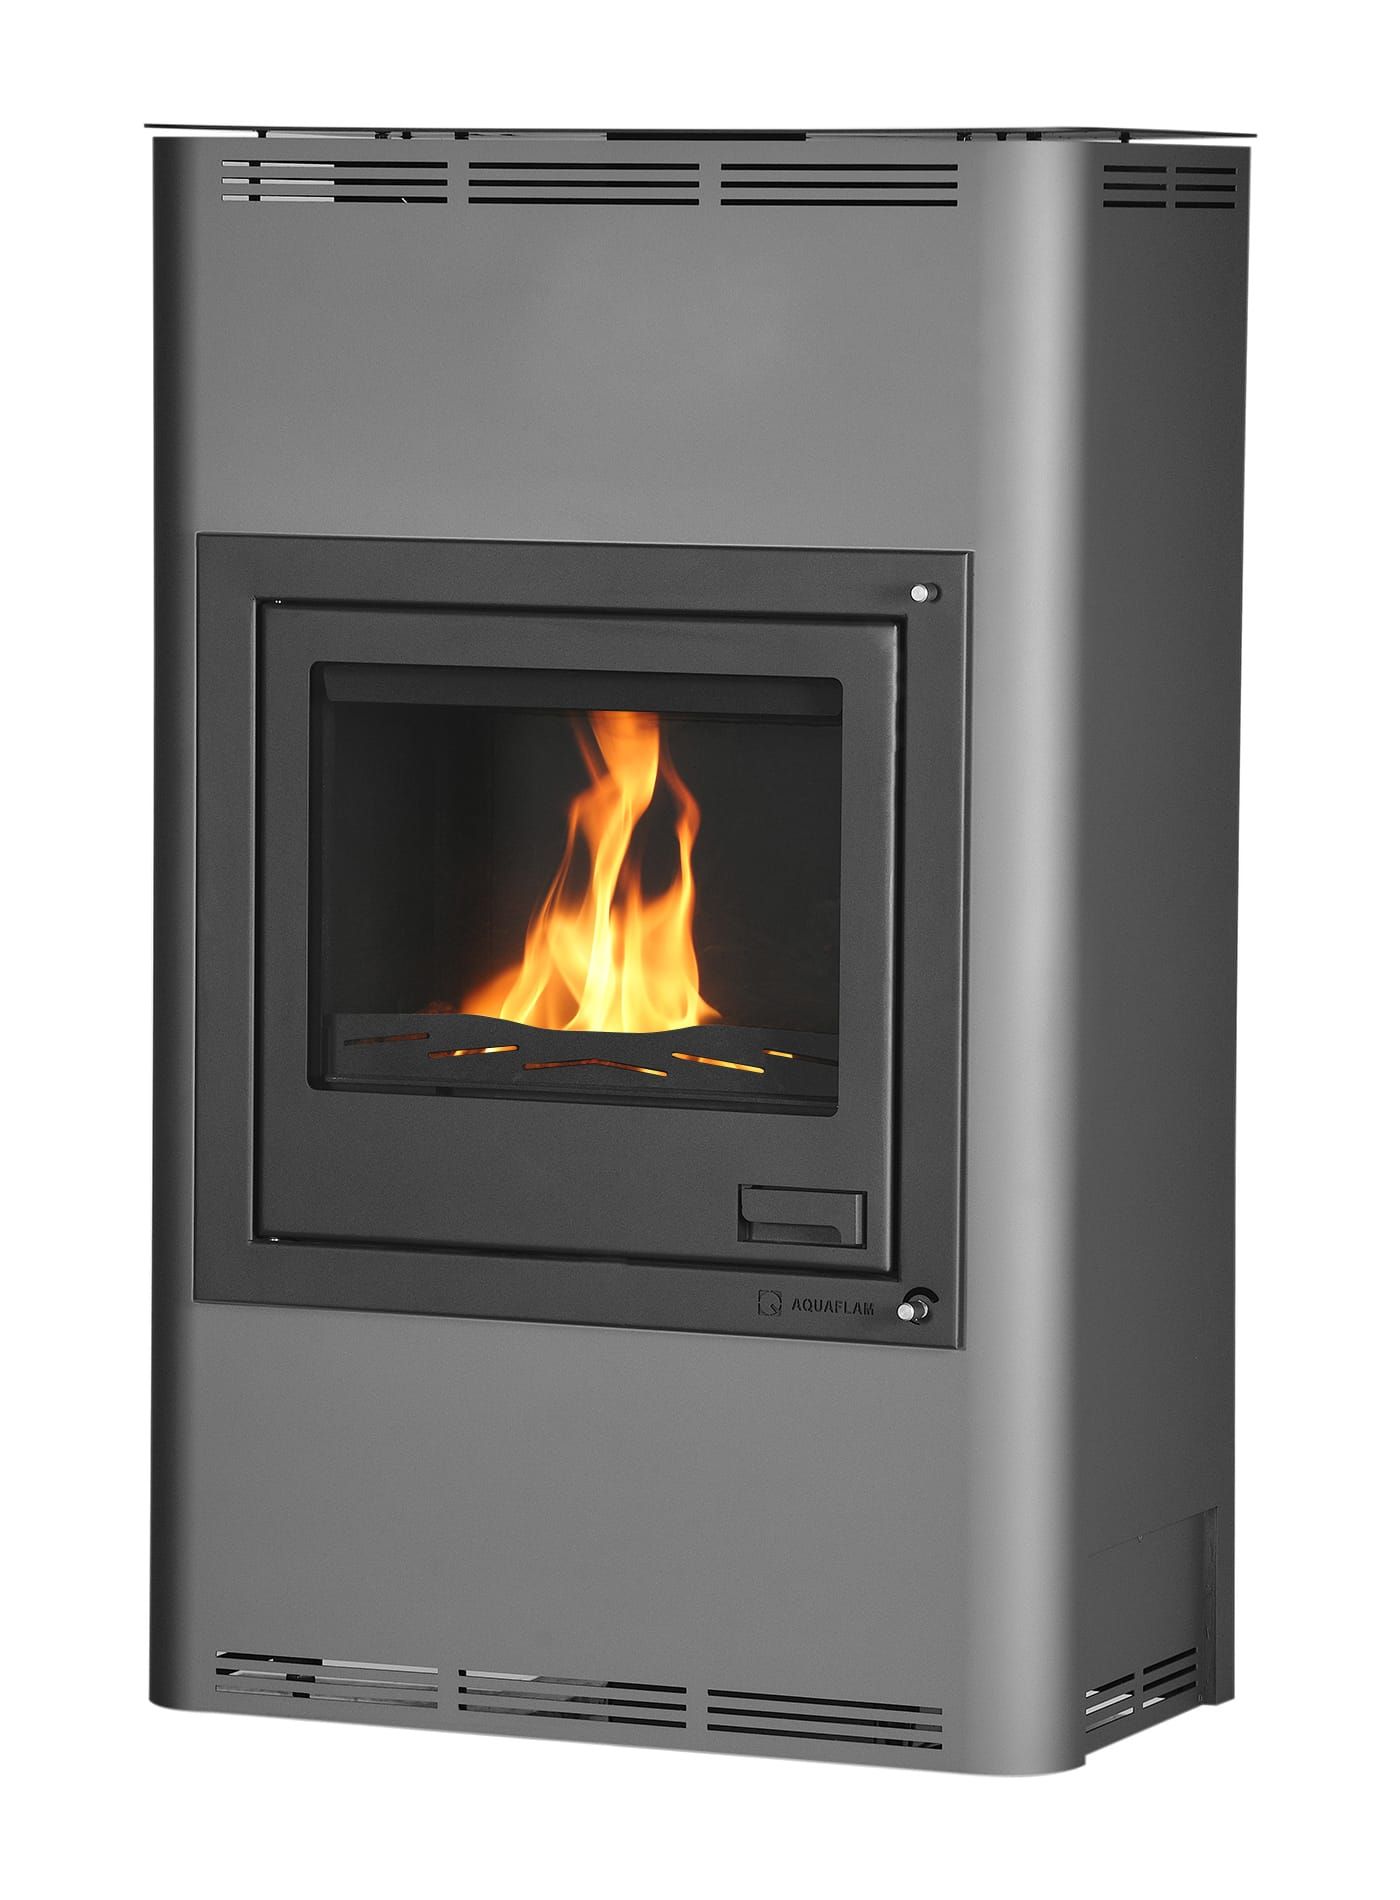 Aquaflam central heating fireplace 25 kW